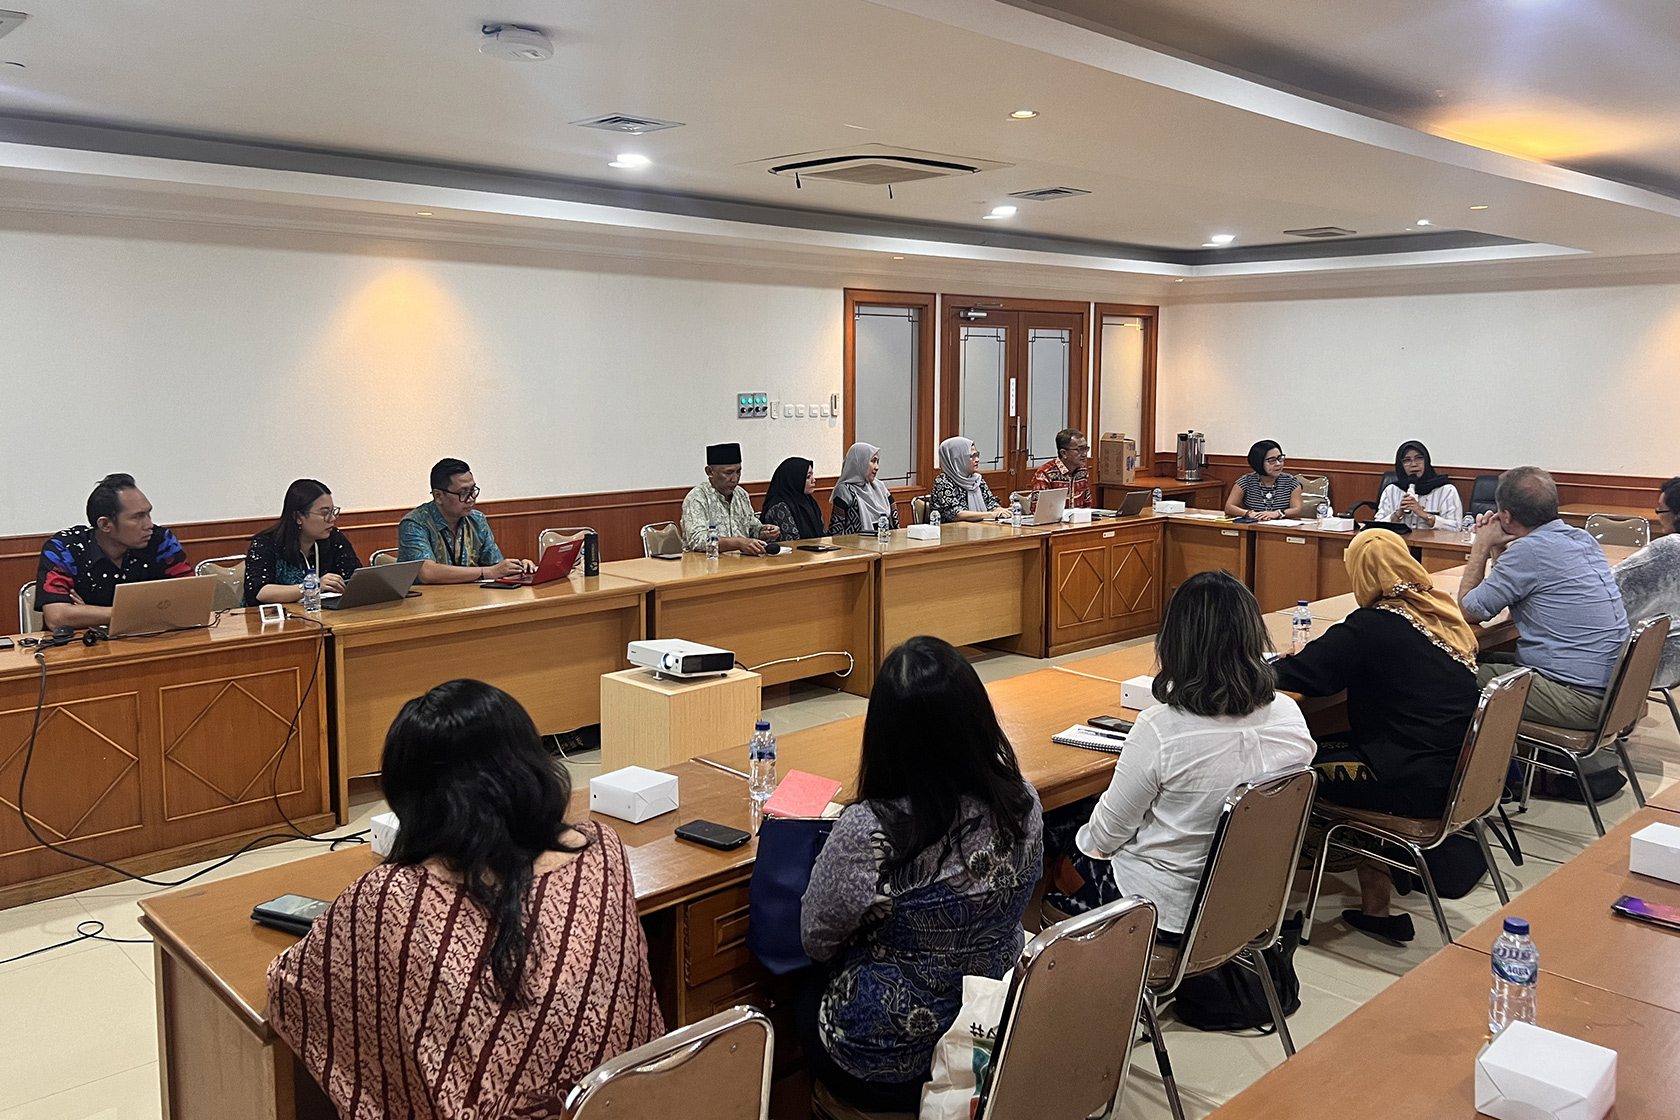 The Australia Awards in Indonesia team convenes with representatives from the National Disabilities Commission to gain fresh perspectives on enhancing disability inclusion in higher education.